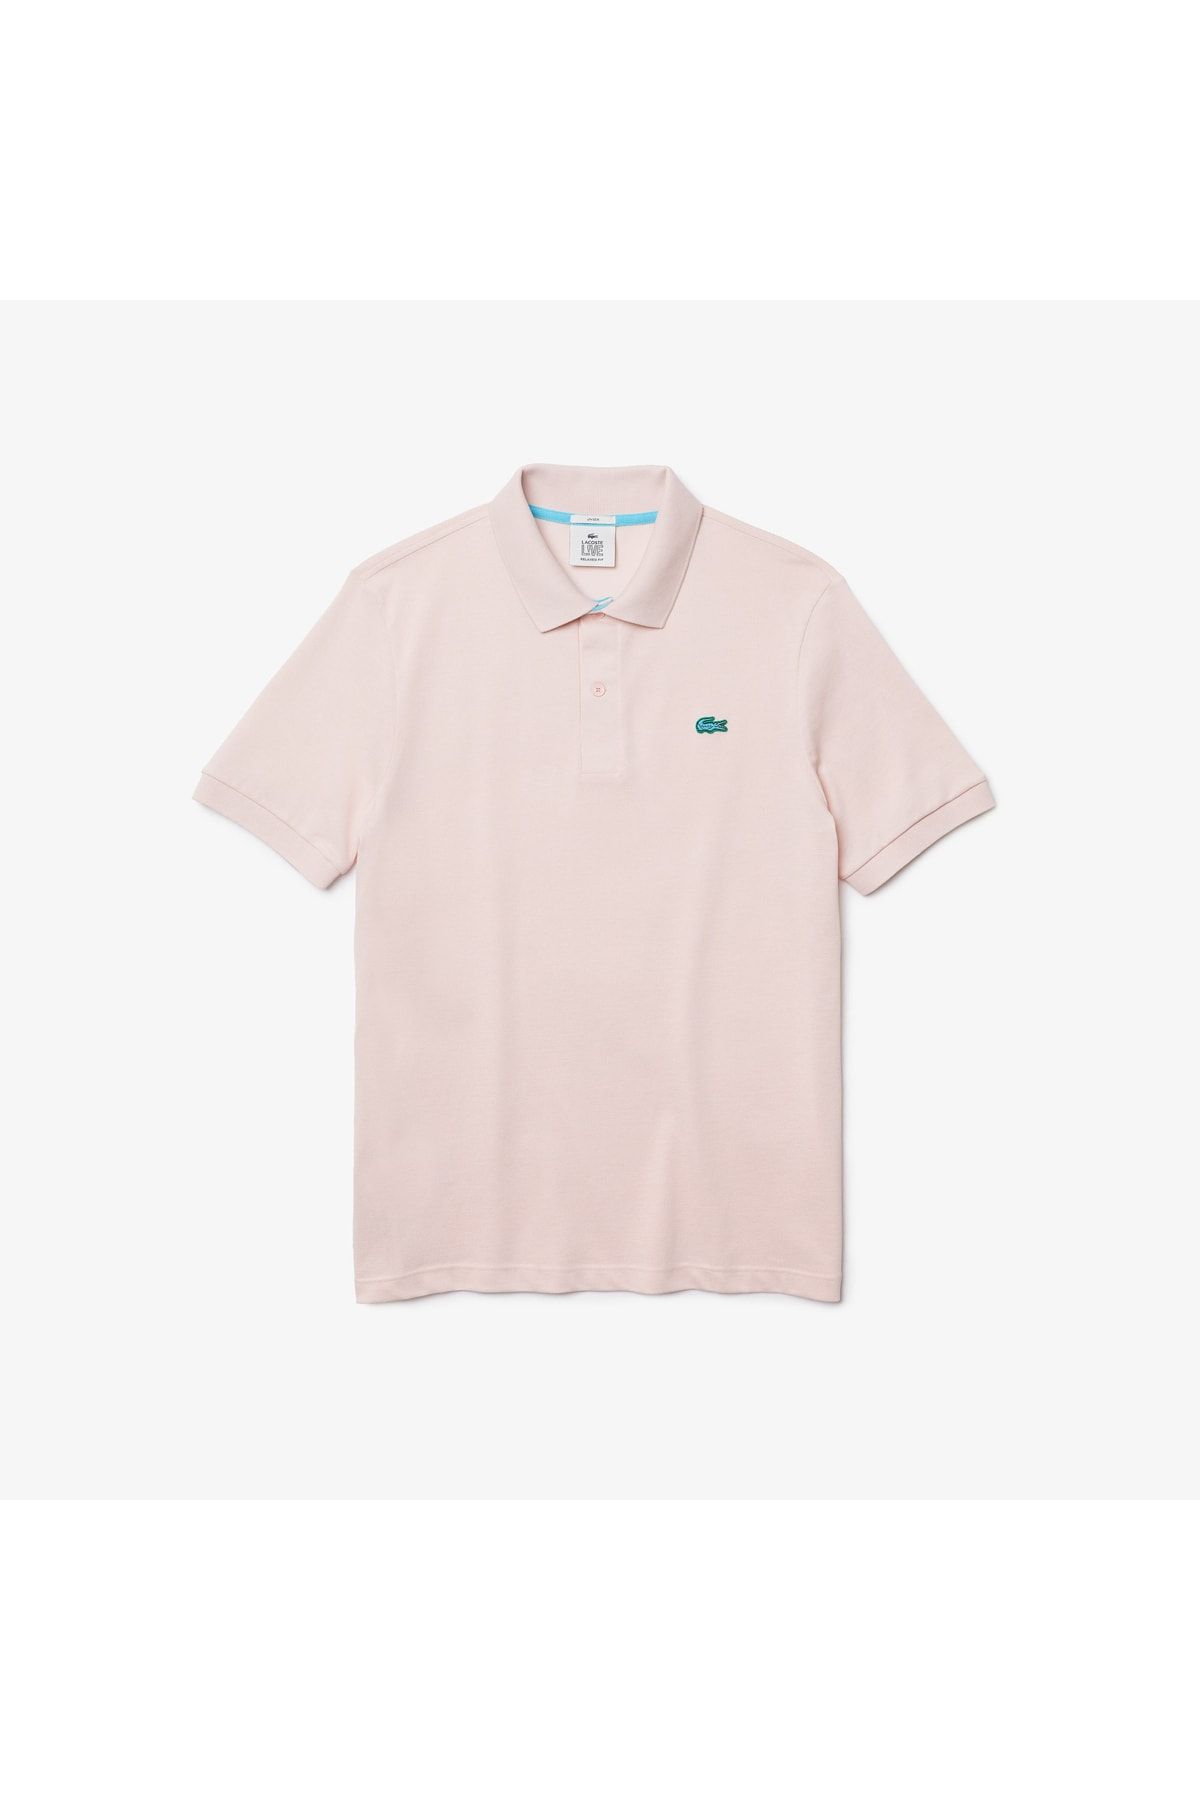 Lacoste L!ve Unisex Relaxed Fit Pembe Polo